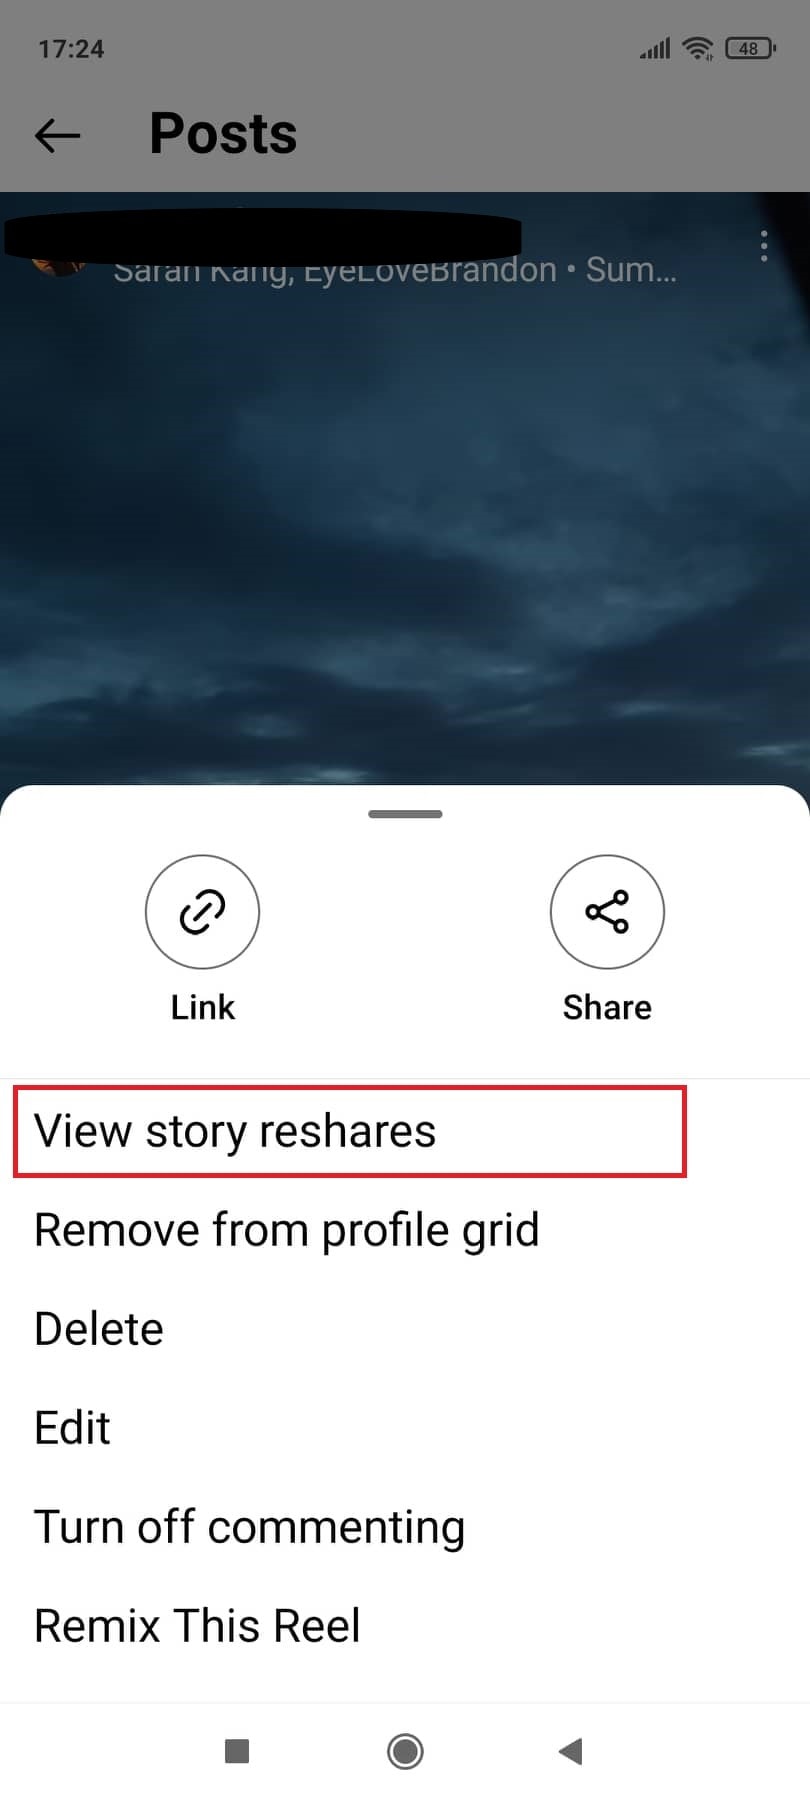 View stories reshared will reveal who has shared your posts